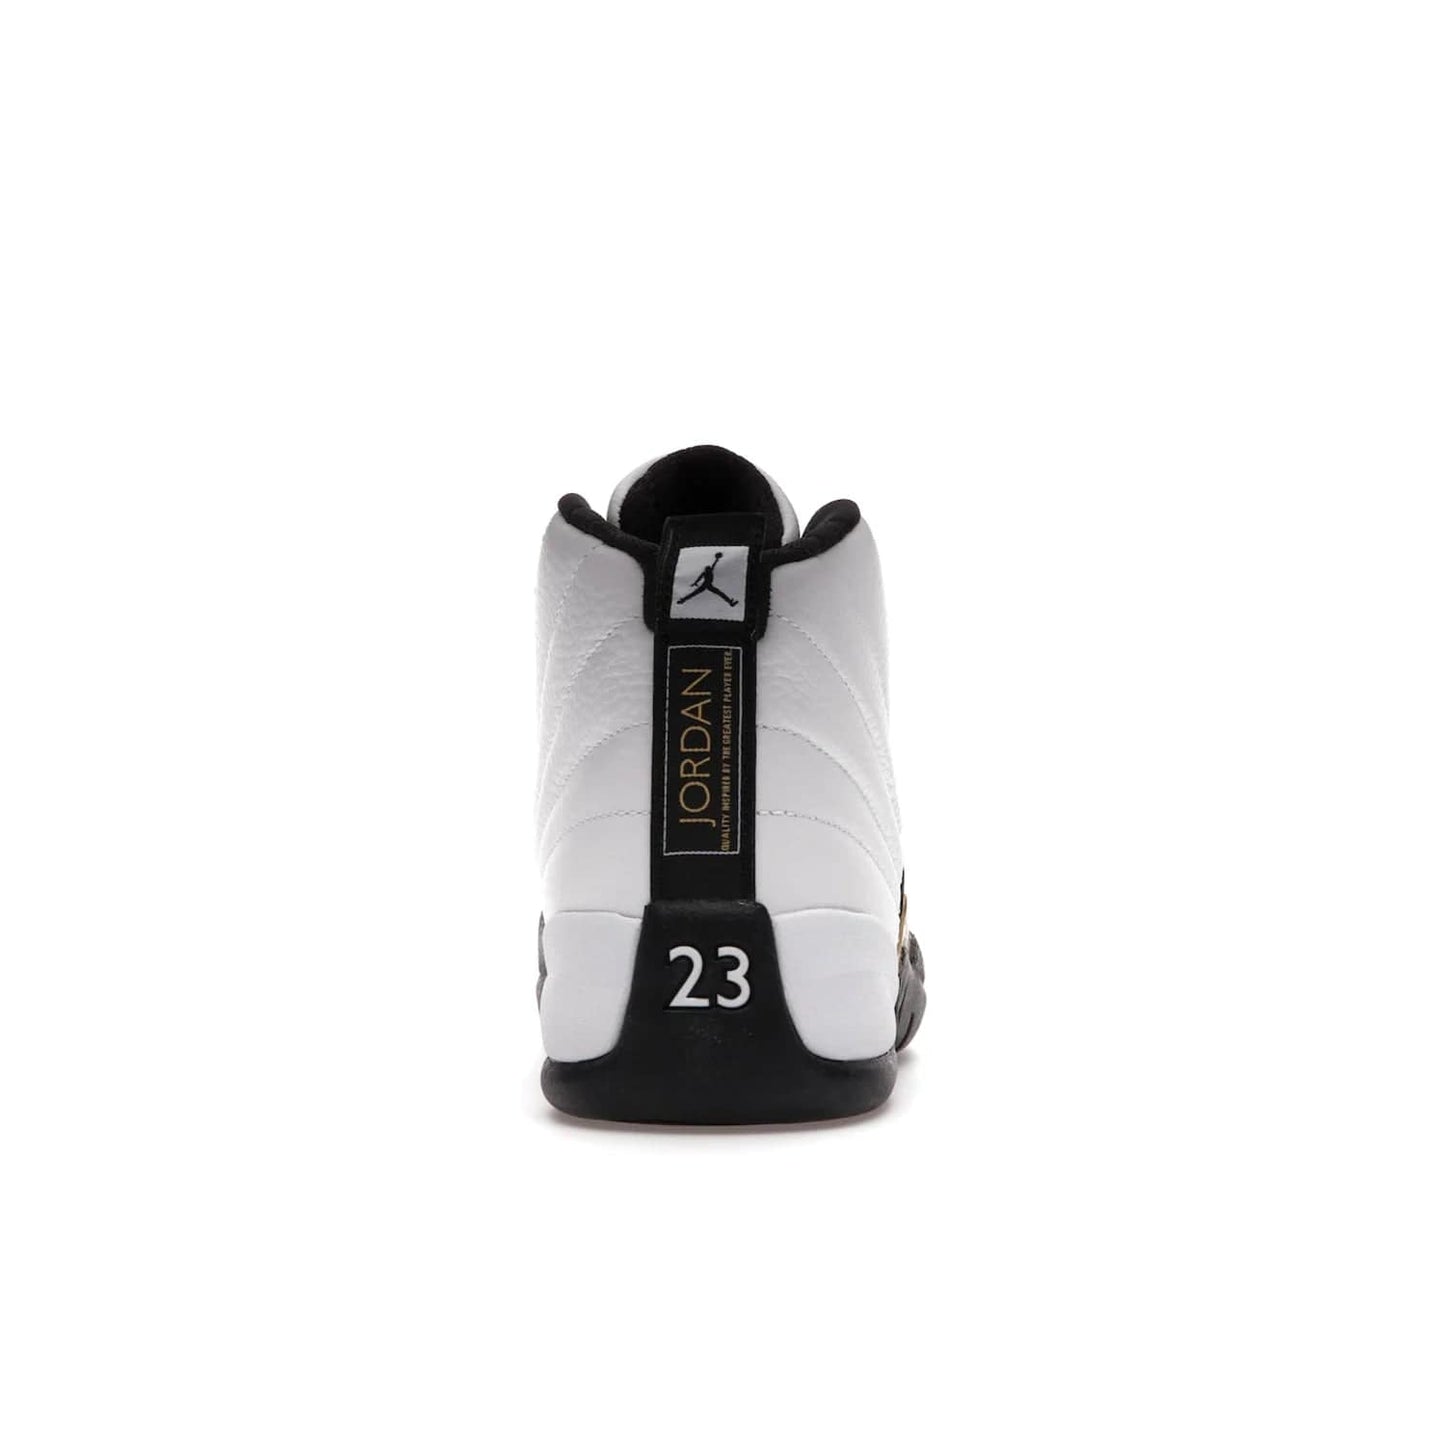 Jordan 12 Retro Royalty Taxi - Image 28 - Only at www.BallersClubKickz.com - Make a statement with the Air Jordan 12 Retro Royalty Taxi. Woven heel tag, gold plaquet, white tumbled leather upper plus a black toe wrap, make this modern take on the classic a must-have. Available in November 2021.